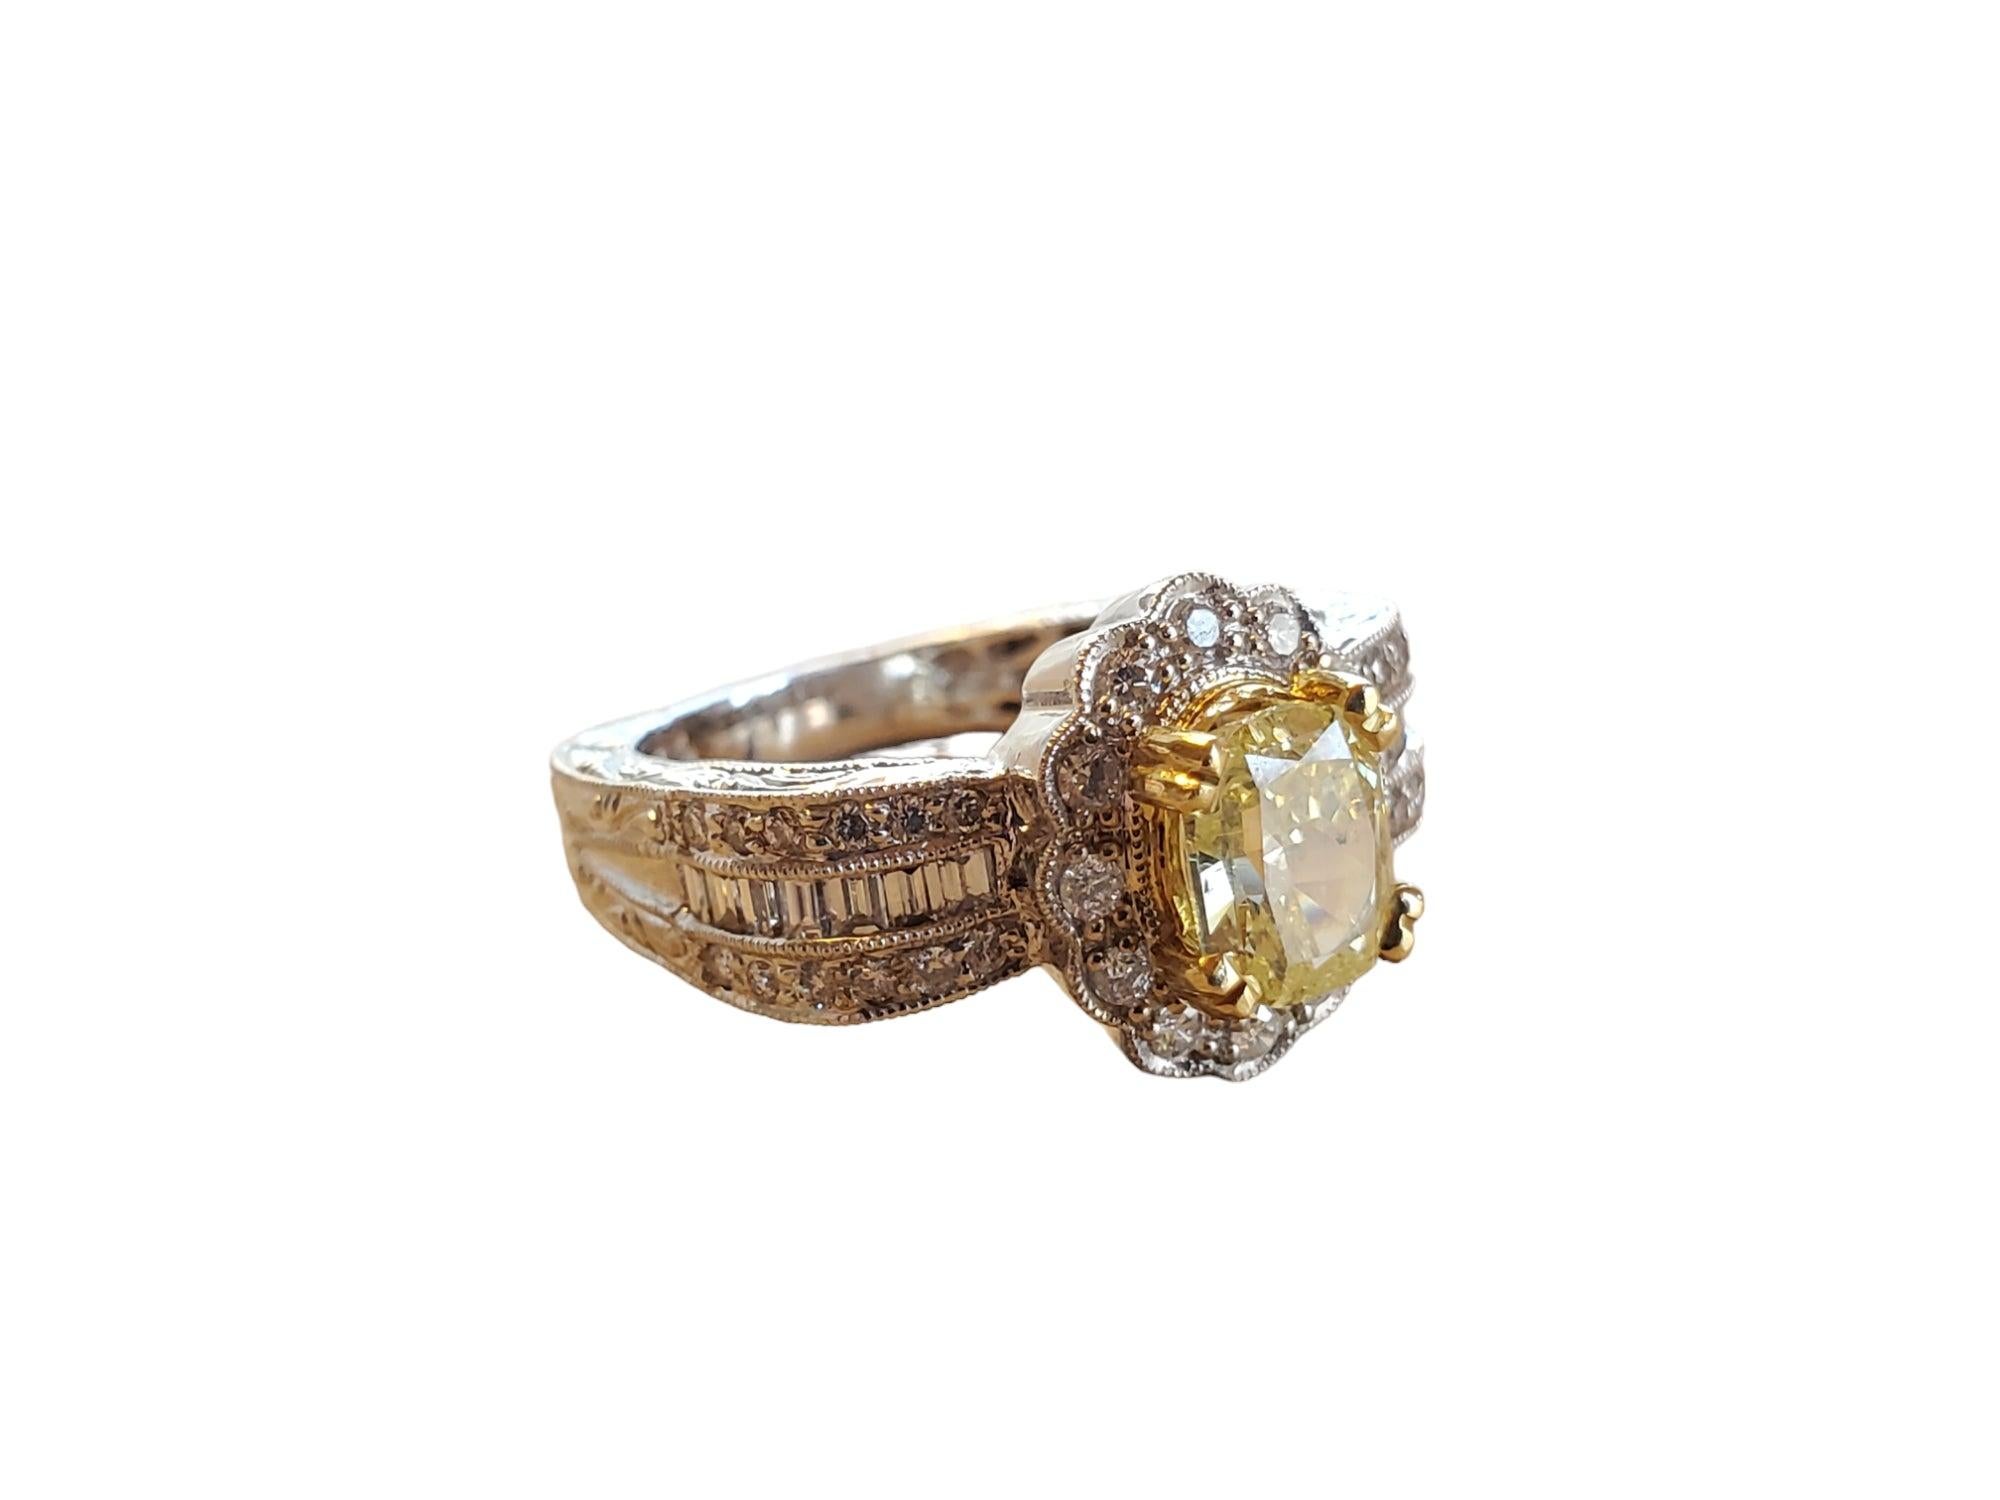 This listing is for an unworn closeout 18k white gold beautiful diamond ring. The center light yellow SI2-I1 diamond is a 1.65ct cushion with .24tcw fancy yellow diamonds and .39tcw white vs diamond halo. This gorgeous ring would make an amazing